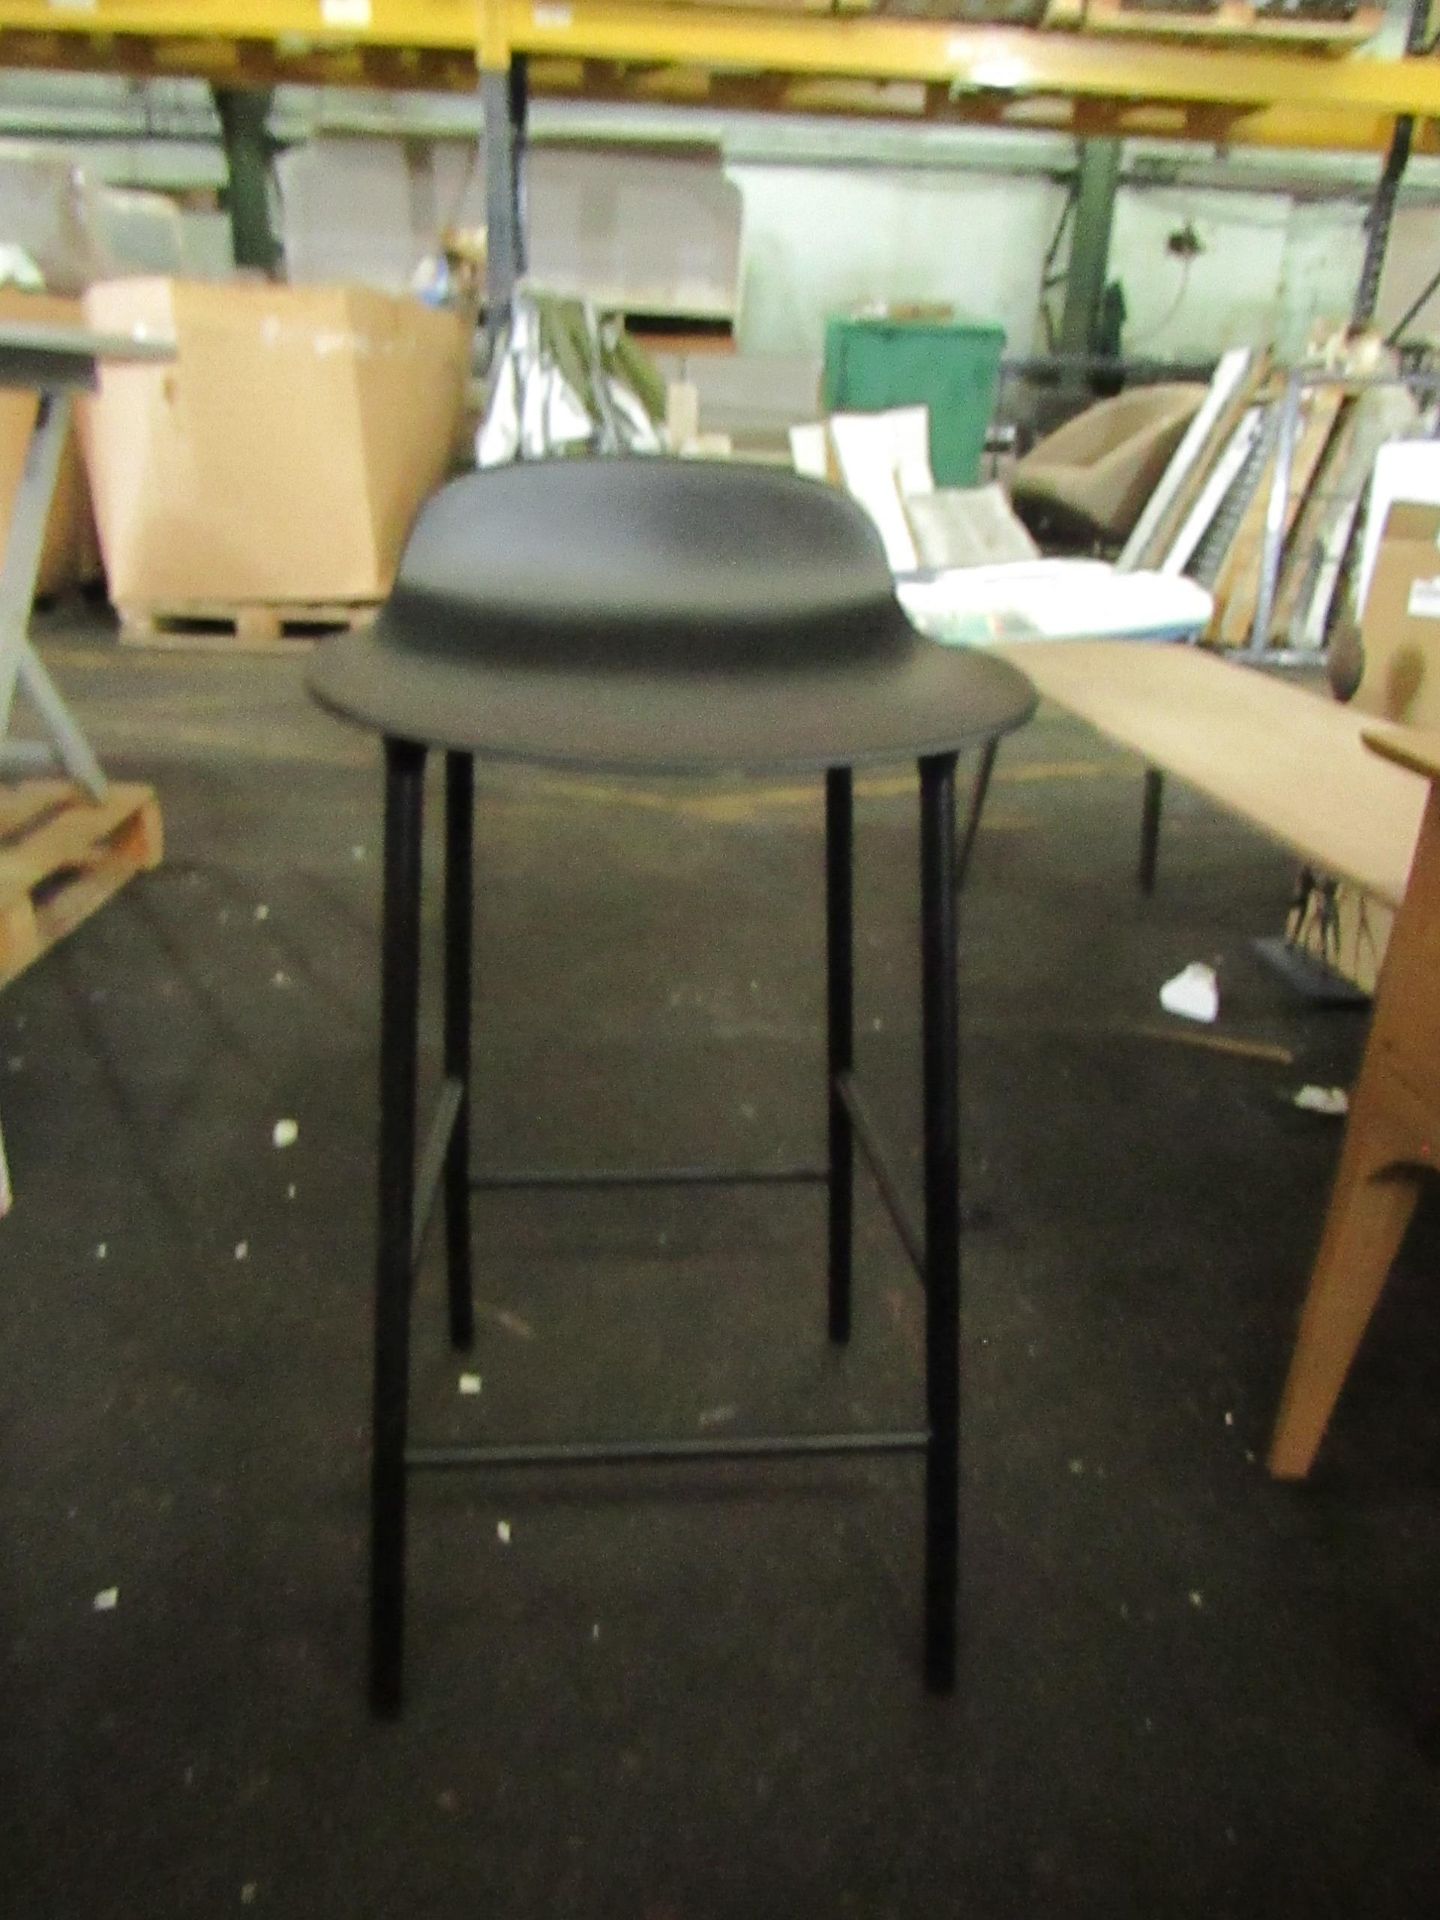 Heals Form Barstool 65 cm Steel Legs Black Shell 602776 RRP ¬£250.00 - This item looks to be in good